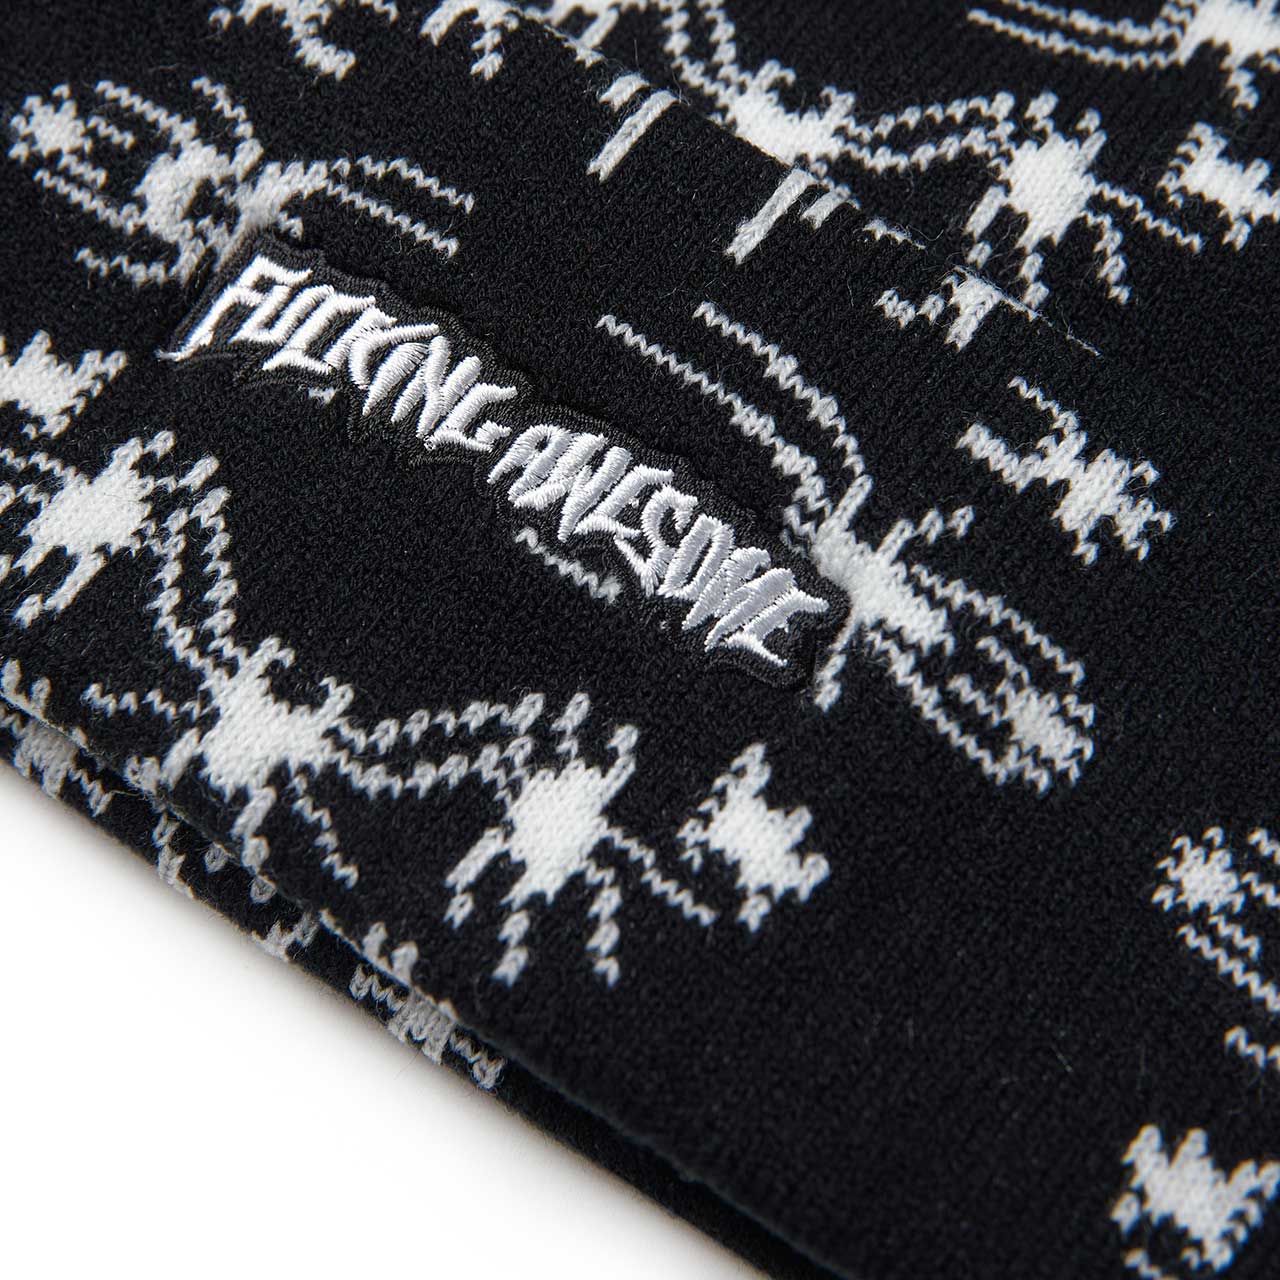 fucking awesome fucking awesome spider stamp cuff beanie (black) p708495-001SPONESIZE